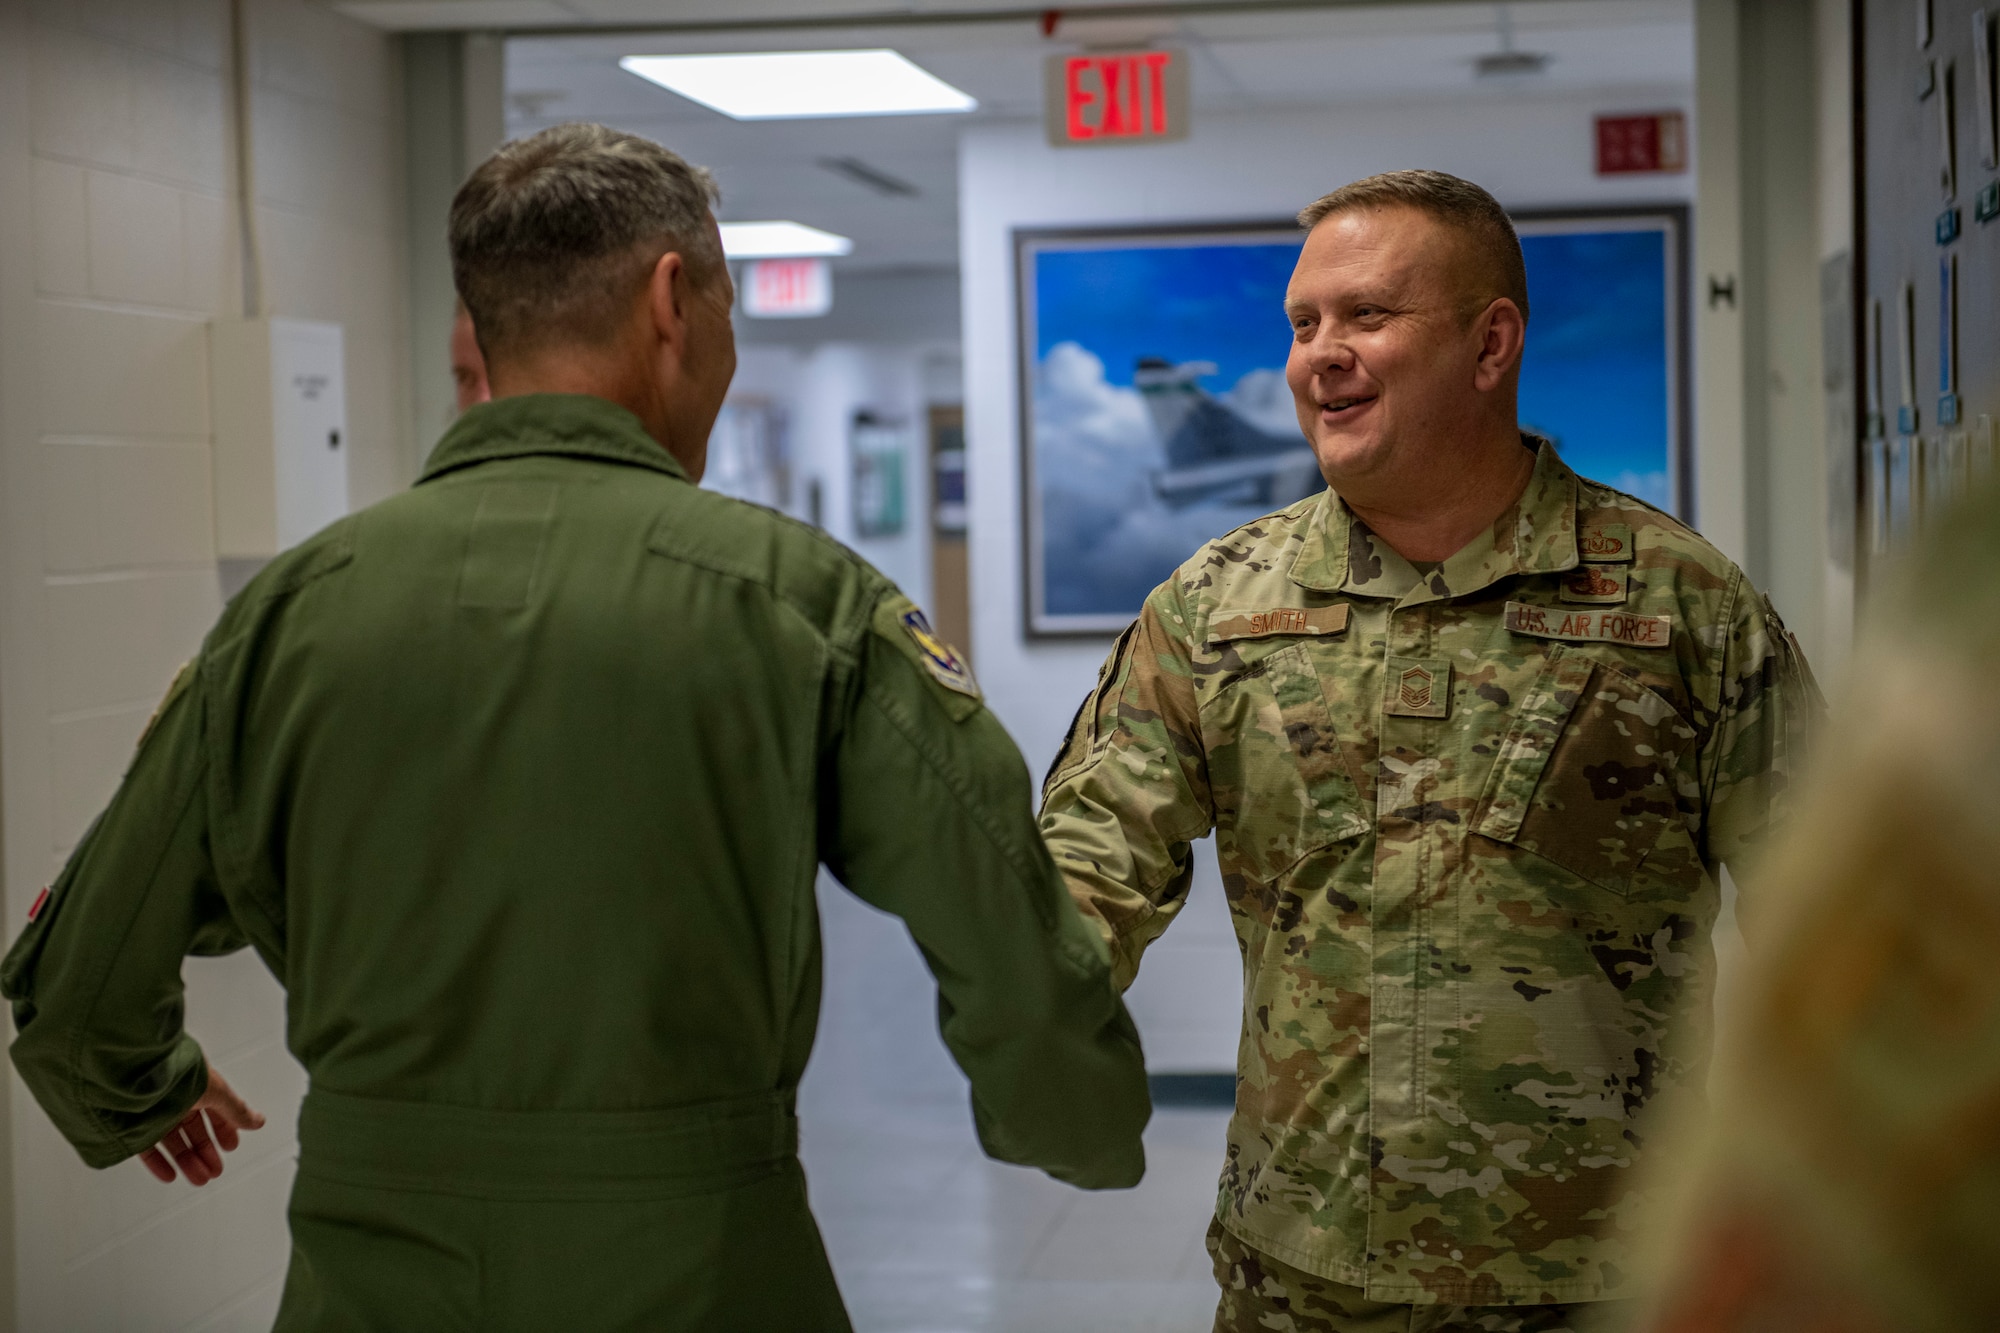 U.S. Air Force Lt. Gen. Steven S. Nordhaus, 1st Air Force commander, shakes hands with U.S. Air Force Senior Master Sgt. Peter Smith, the aircrew flight equipment superintendent, assigned to the Ohio National Guard’s 180th Fighter Wing, in Swanton, Ohio, Feb. 1, 2024. Nordhaus, who commanded the 180FW from 2011 to 2013, received a tour of the wing's facilities and discussed the 180FW’s Aerospace Control Alert mission during his visit. (U.S. Air National Guard photo by Airman 1st Class Nicholas Battani)